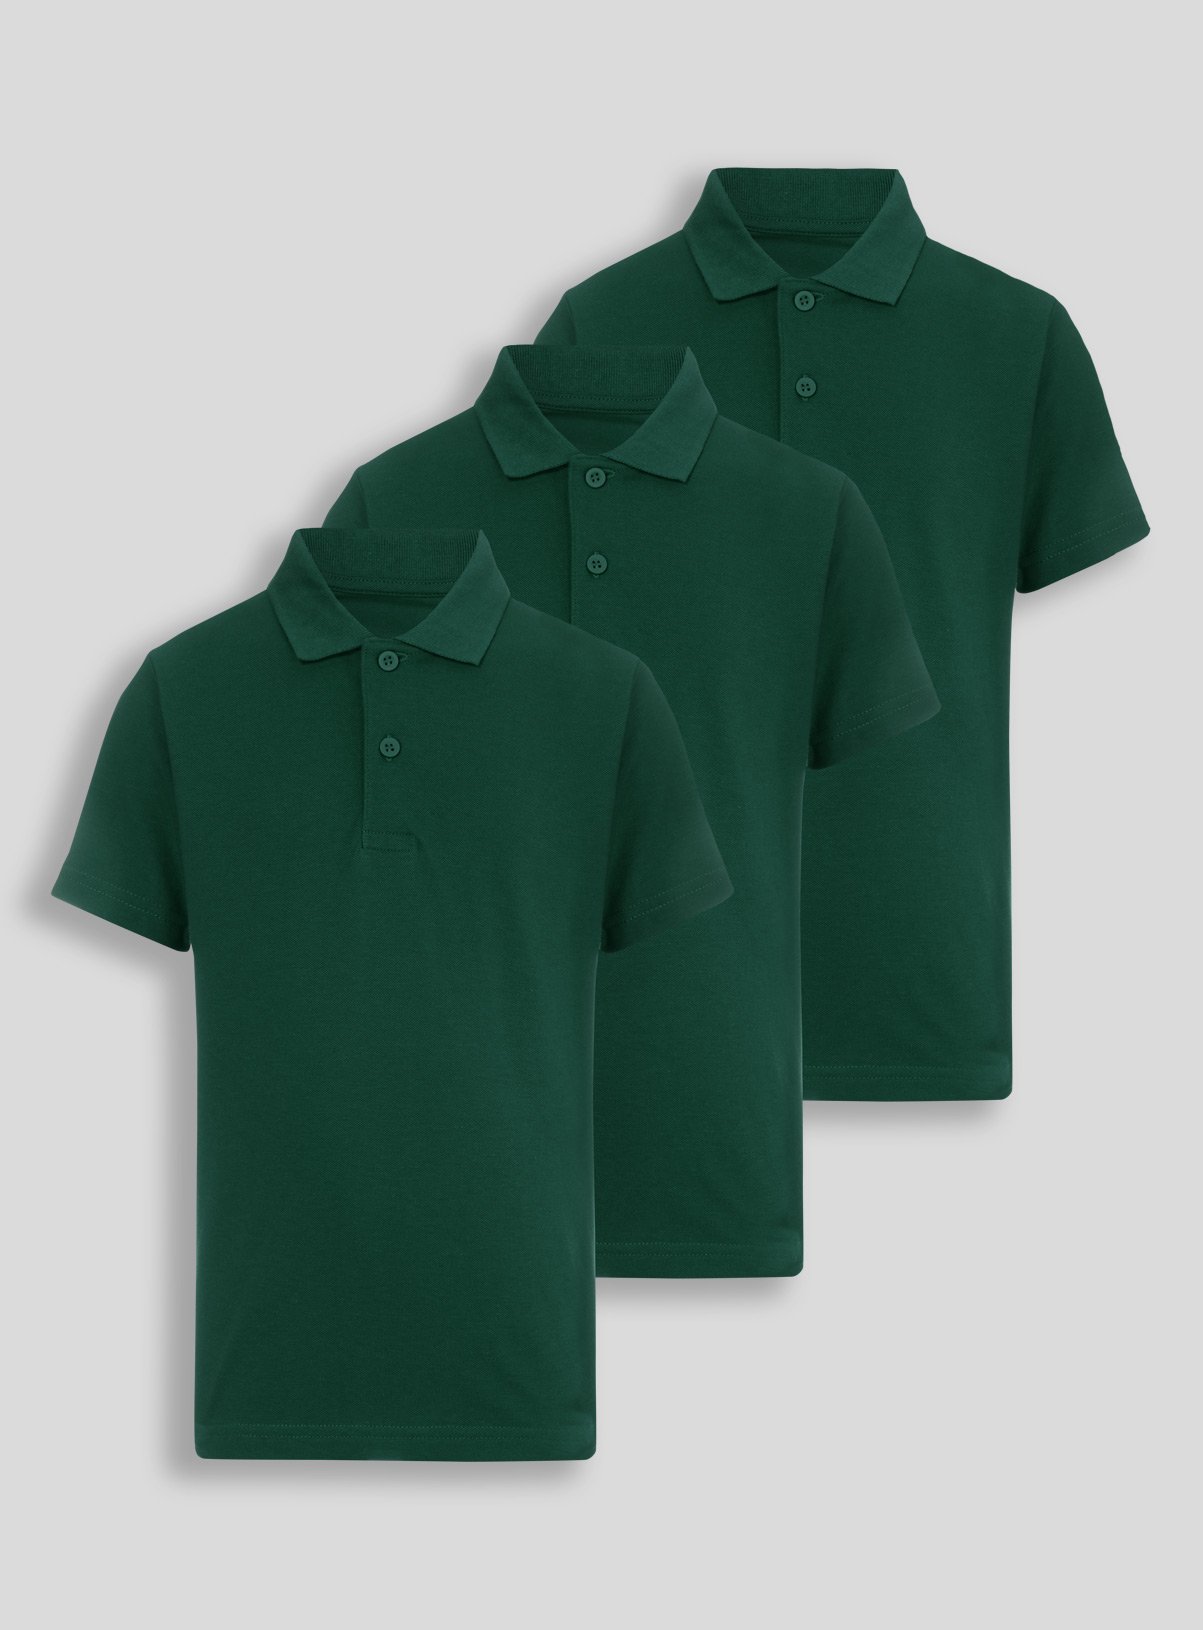 forest green polo shirt